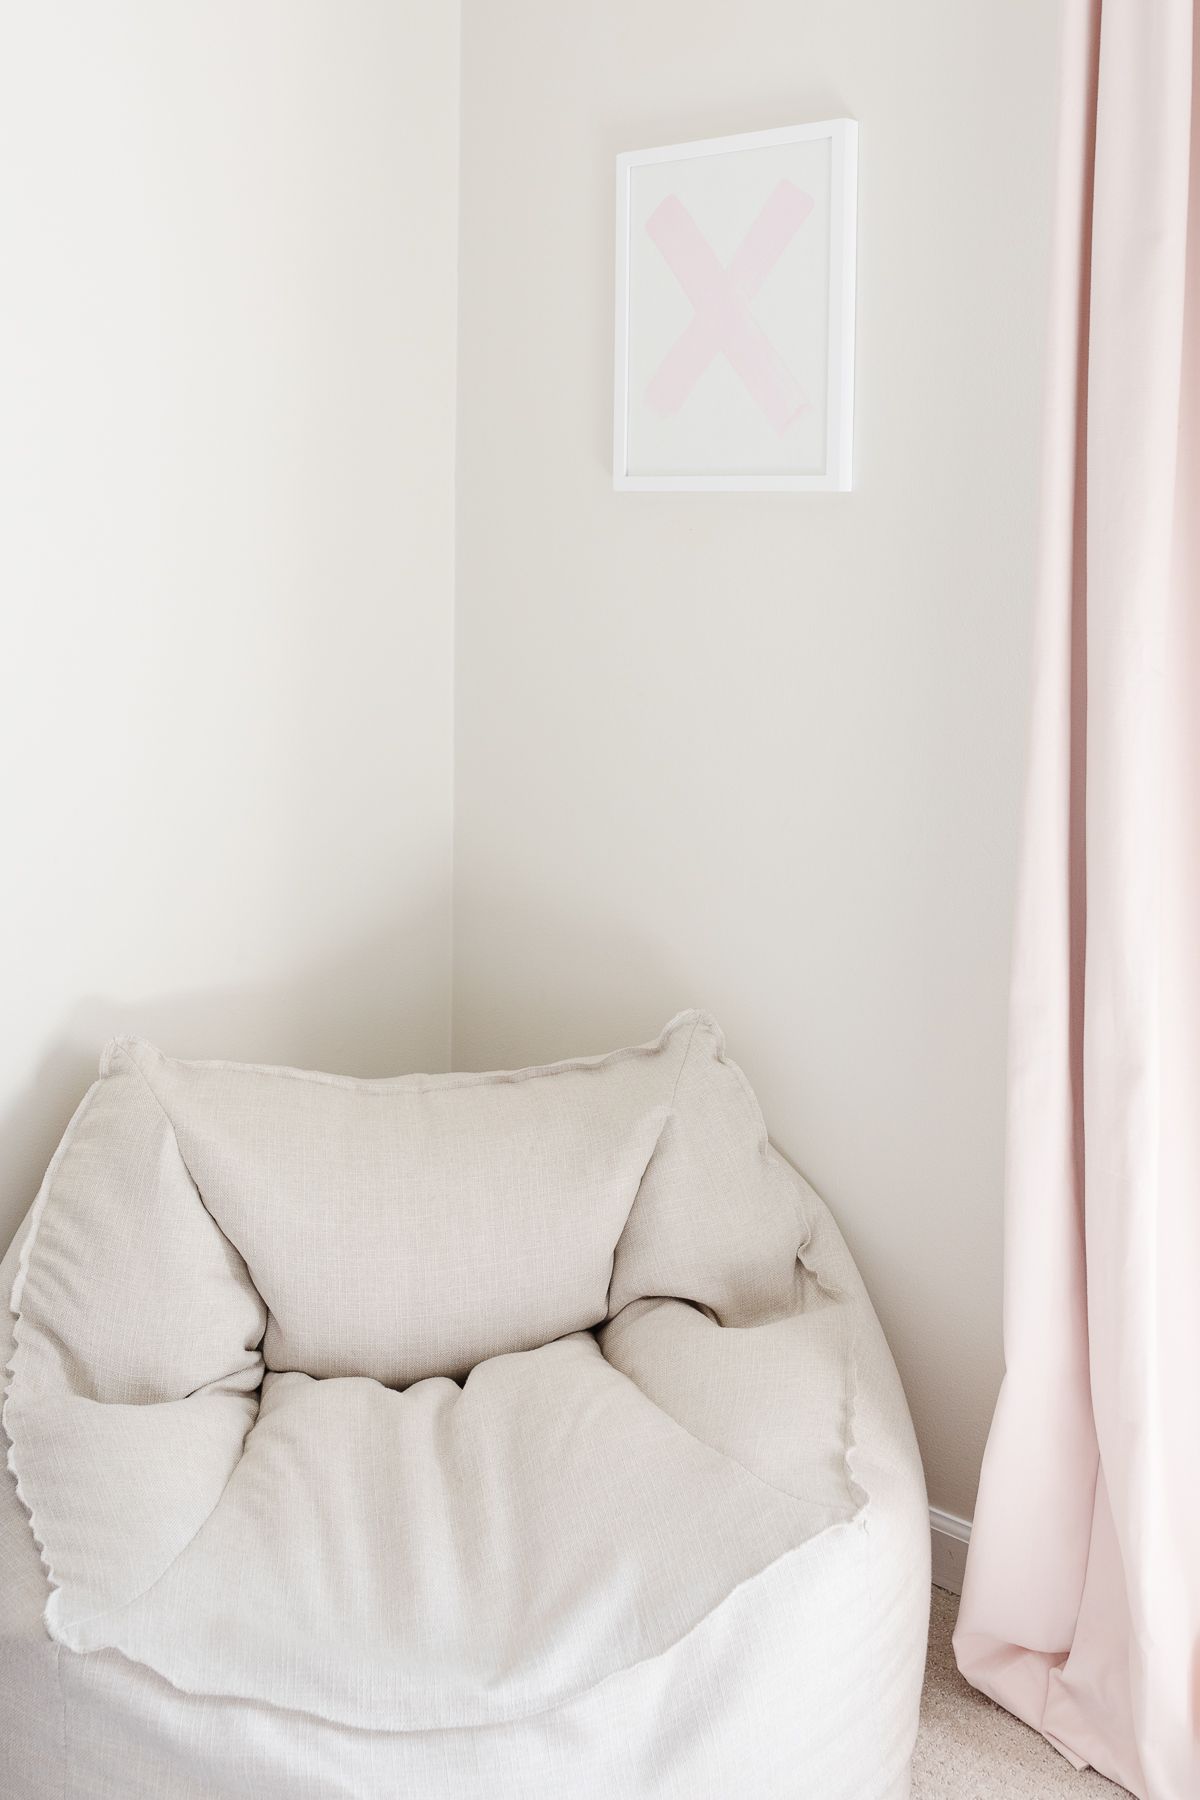 A neutral bean bag chair in the corner of a cream tween bedroom, pink curtain panel on the edge of image.